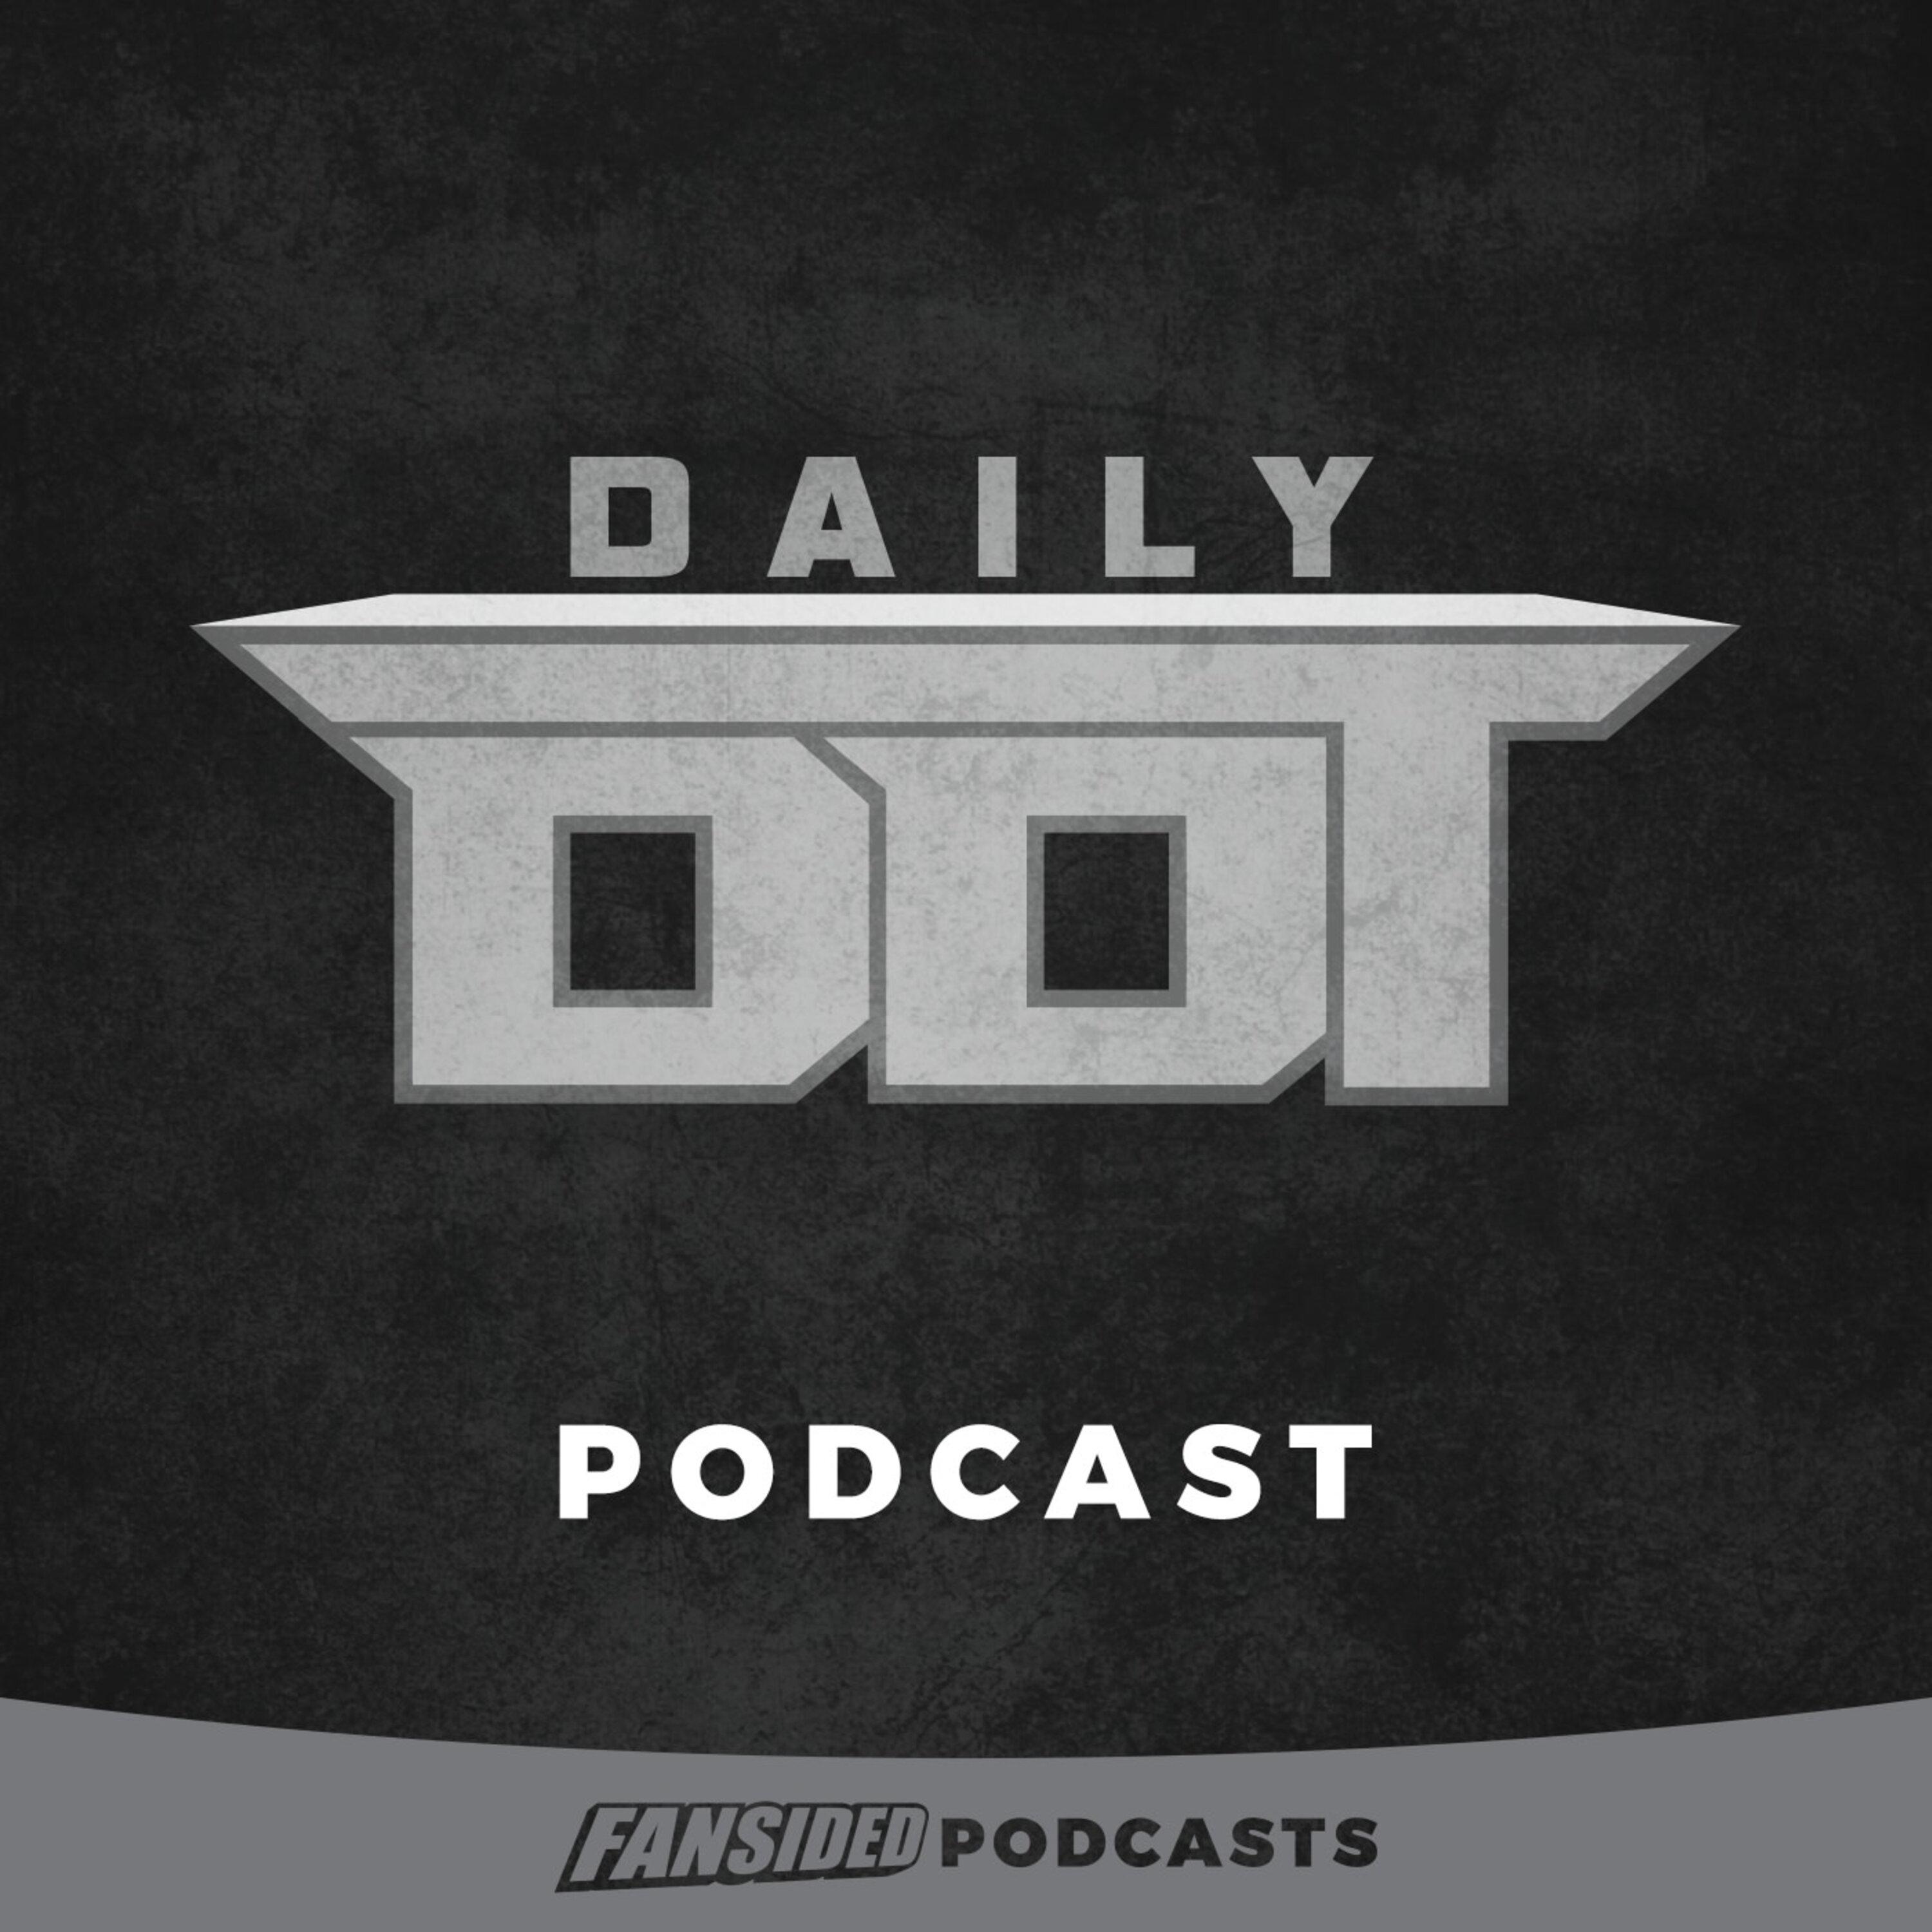 Daily DDT Podcast